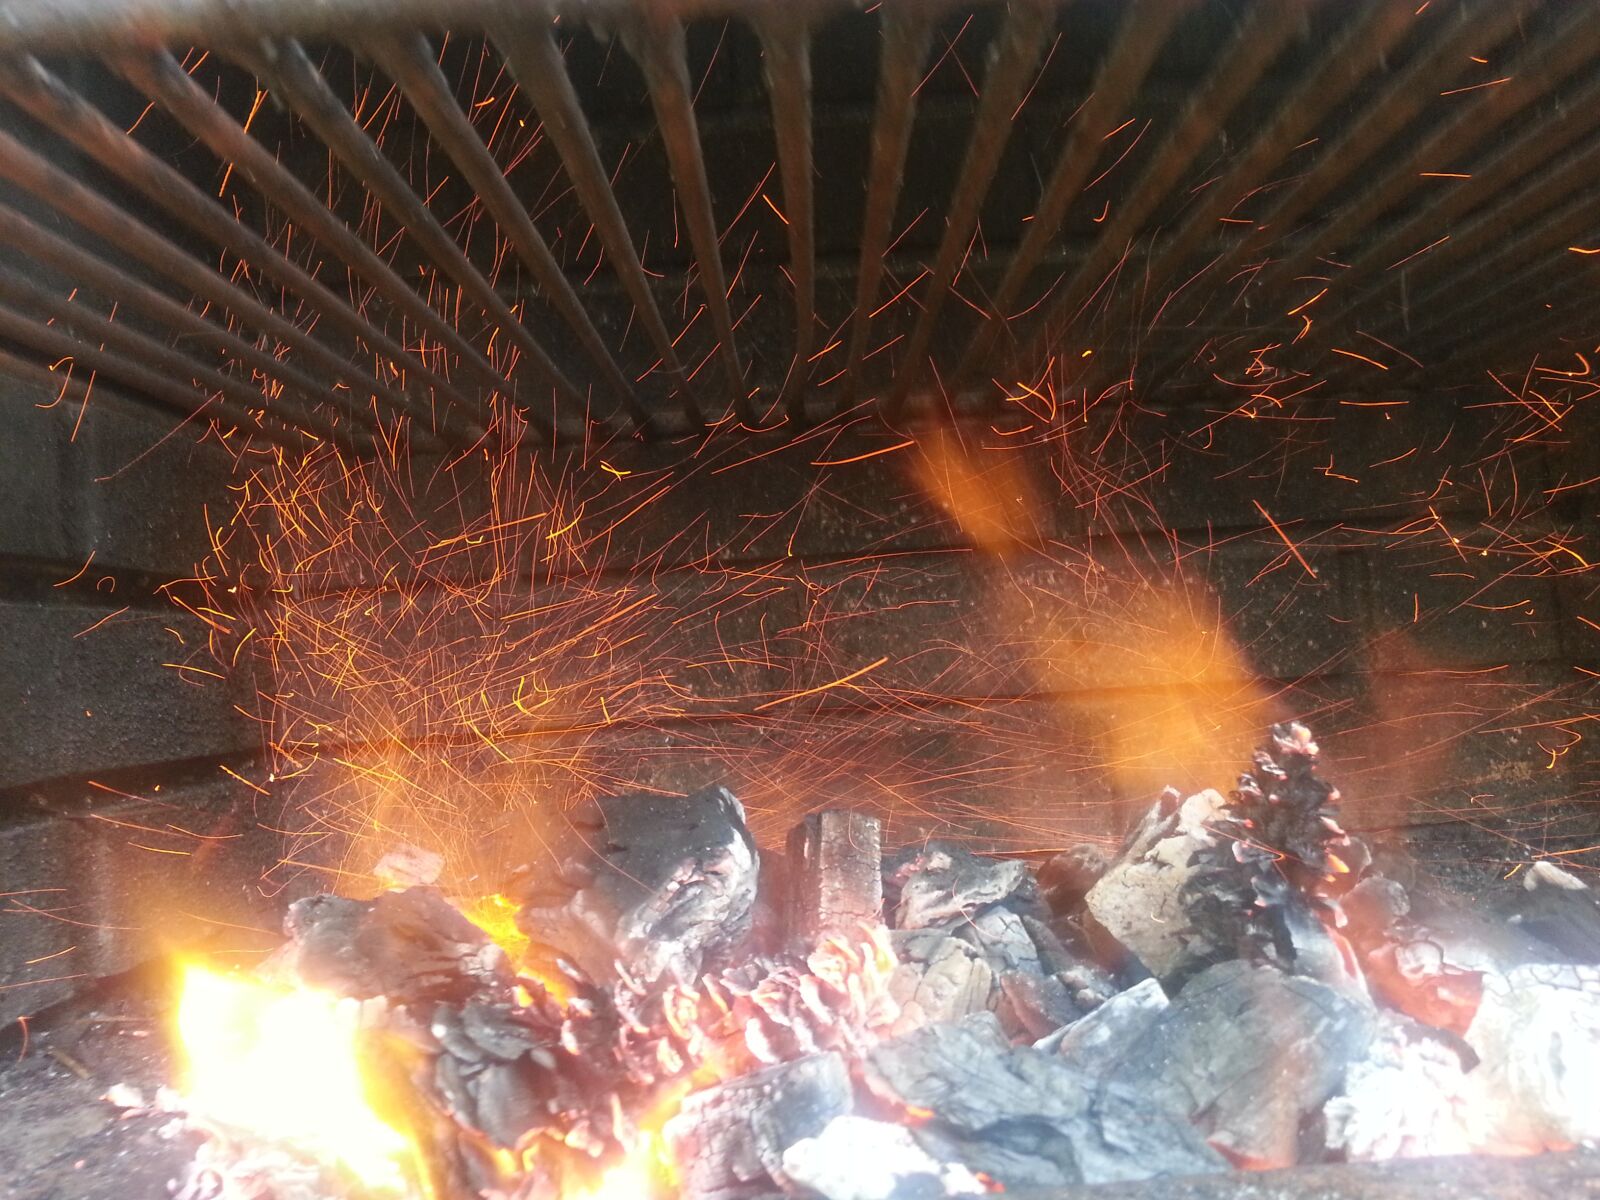 Samsung Galaxy S3 sample photo. Grill, barbecue, fire photography